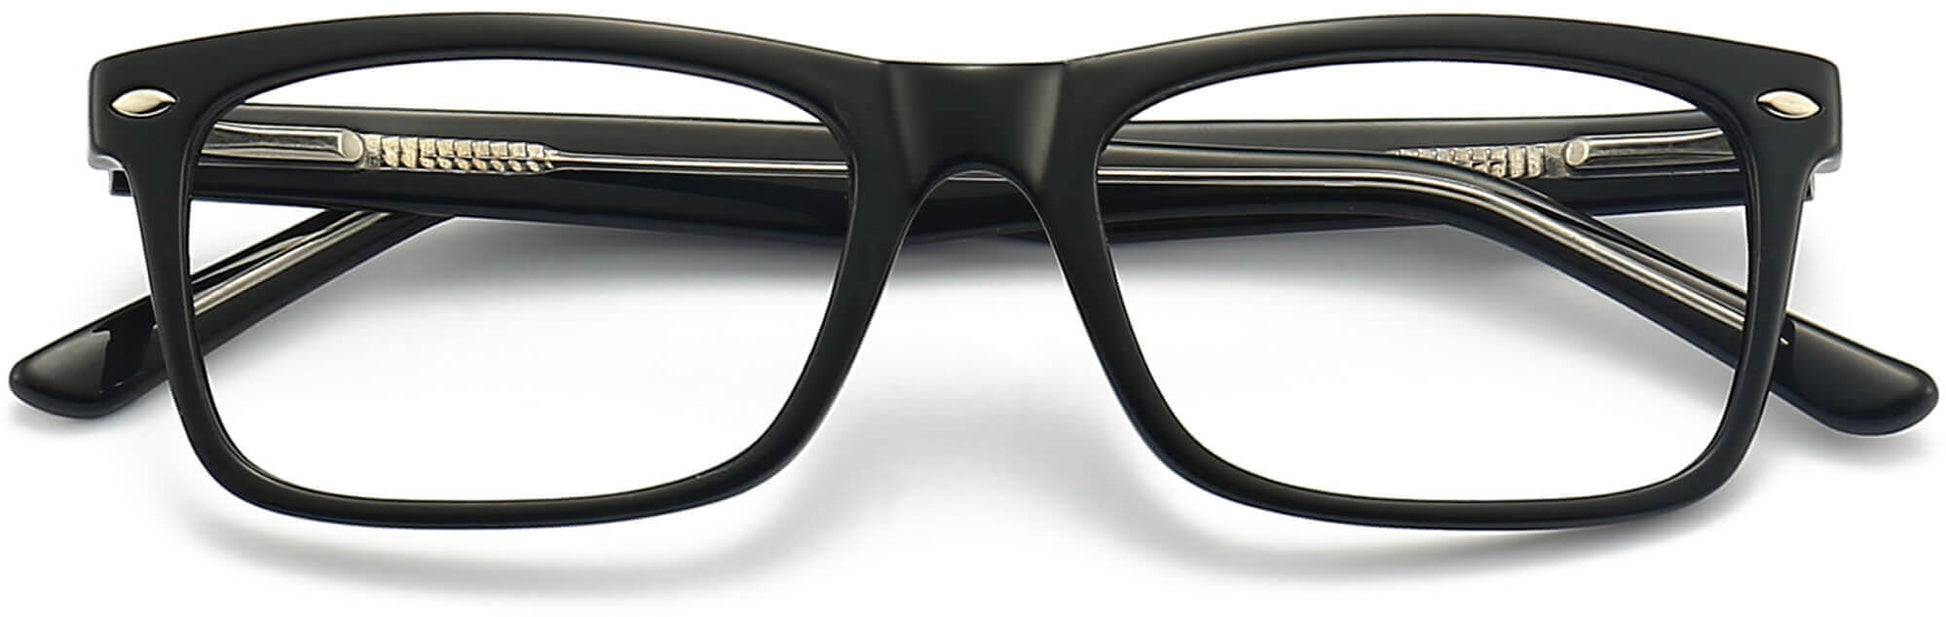 Mack Rectangle Black Eyeglasses from ANRRI, closed view